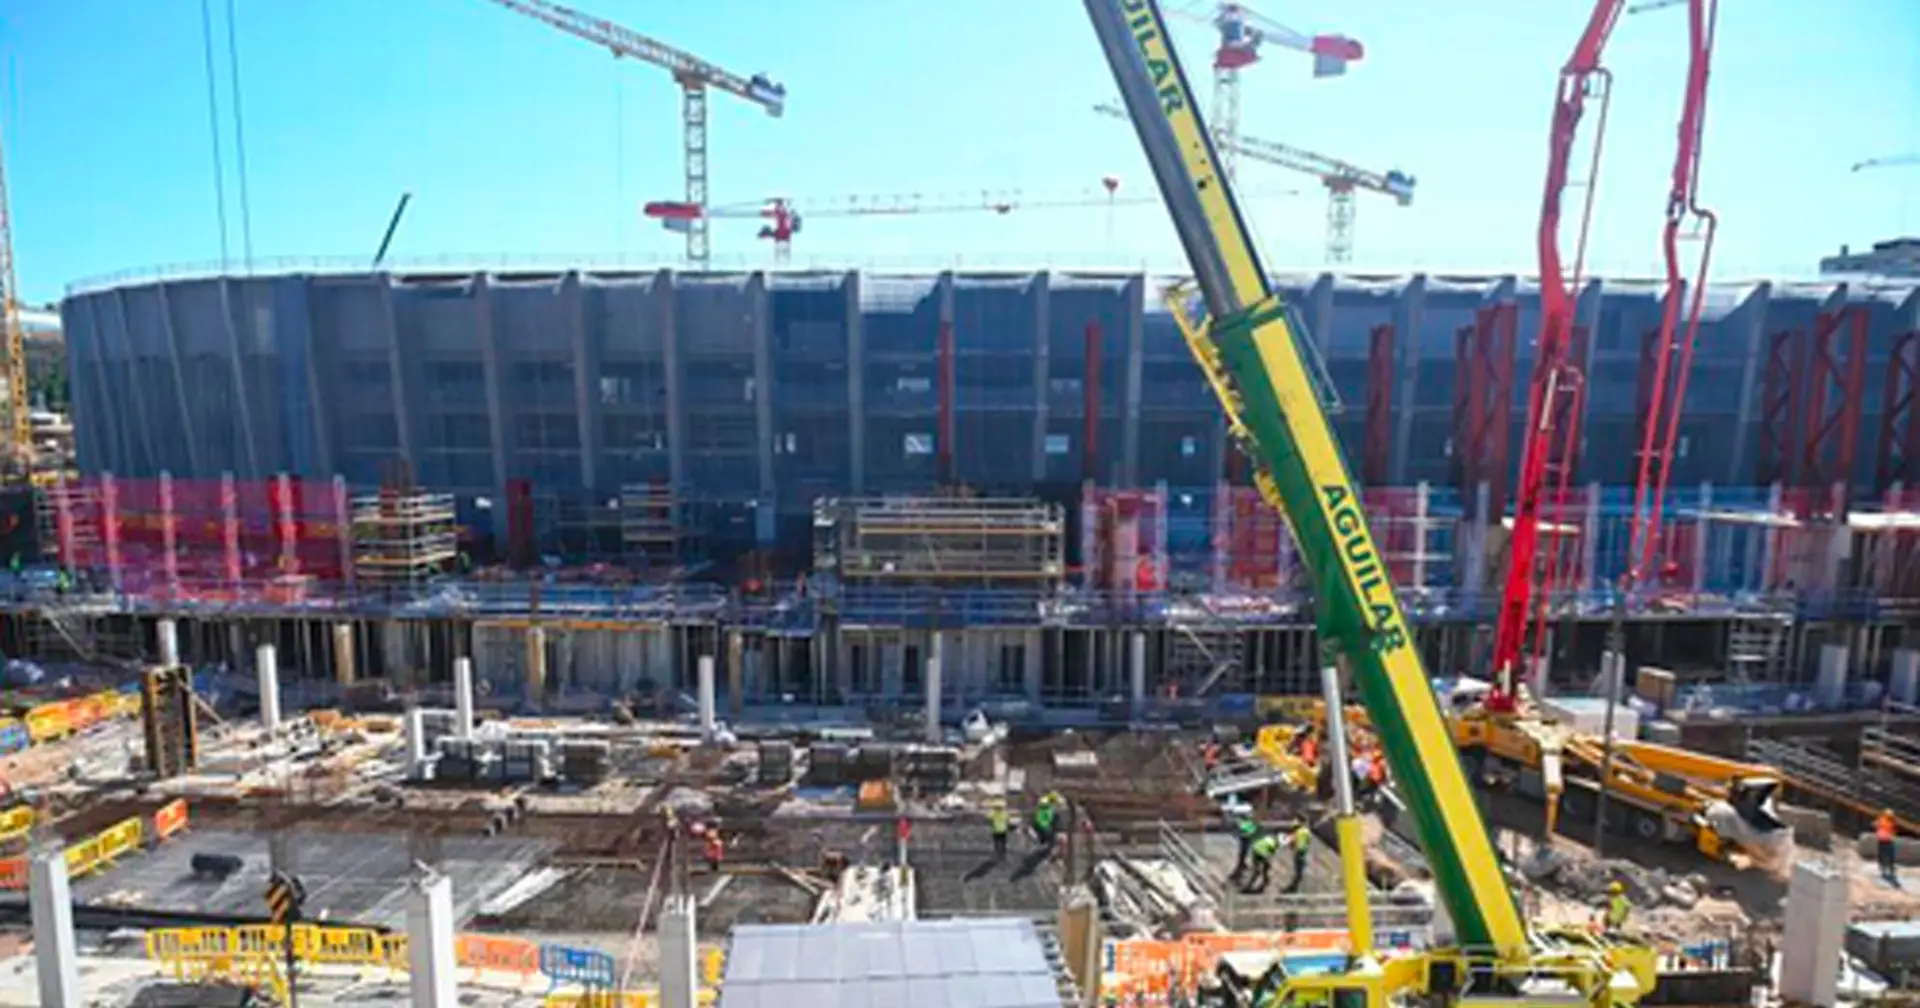 4 fresh pics of Camp Nou construction works – it's really taking shape now